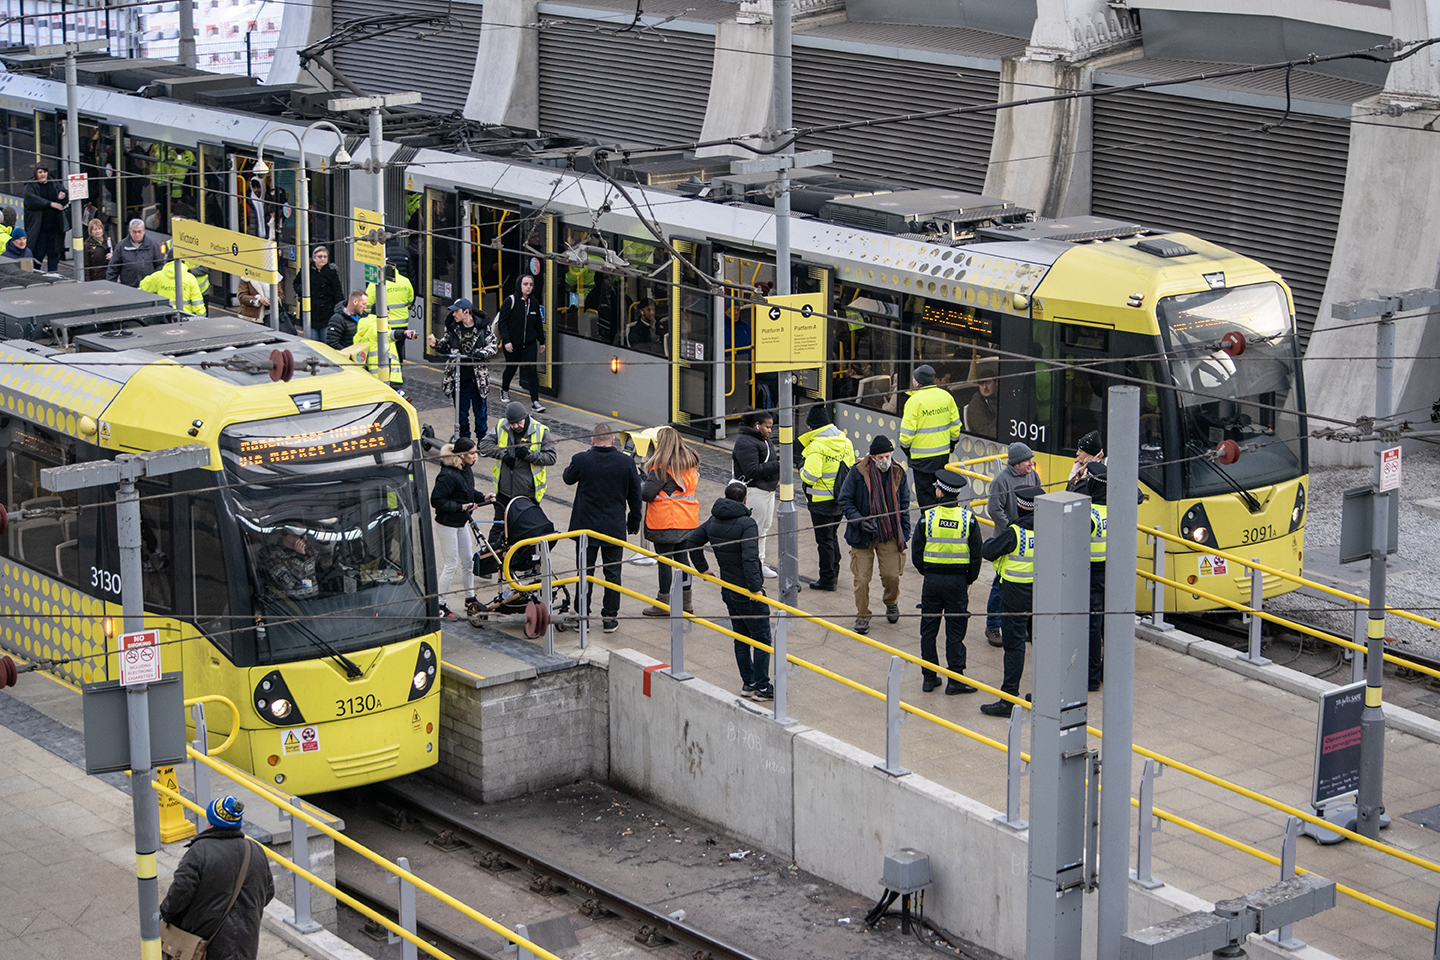 Metrolink trams at Manchester Victoria